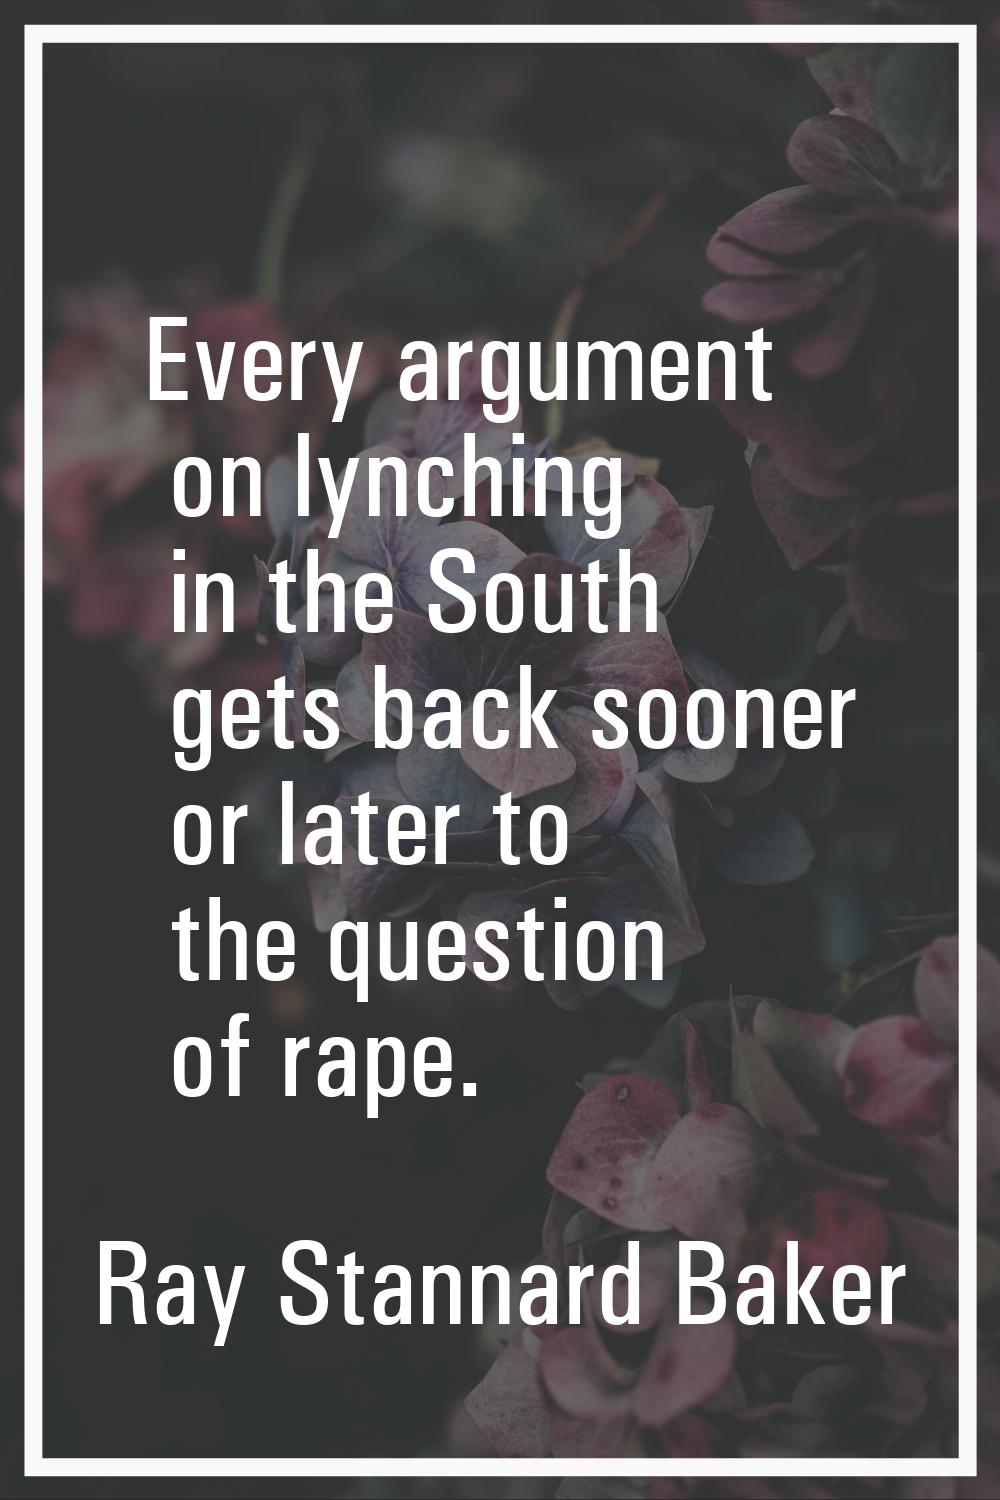 Every argument on lynching in the South gets back sooner or later to the question of rape.